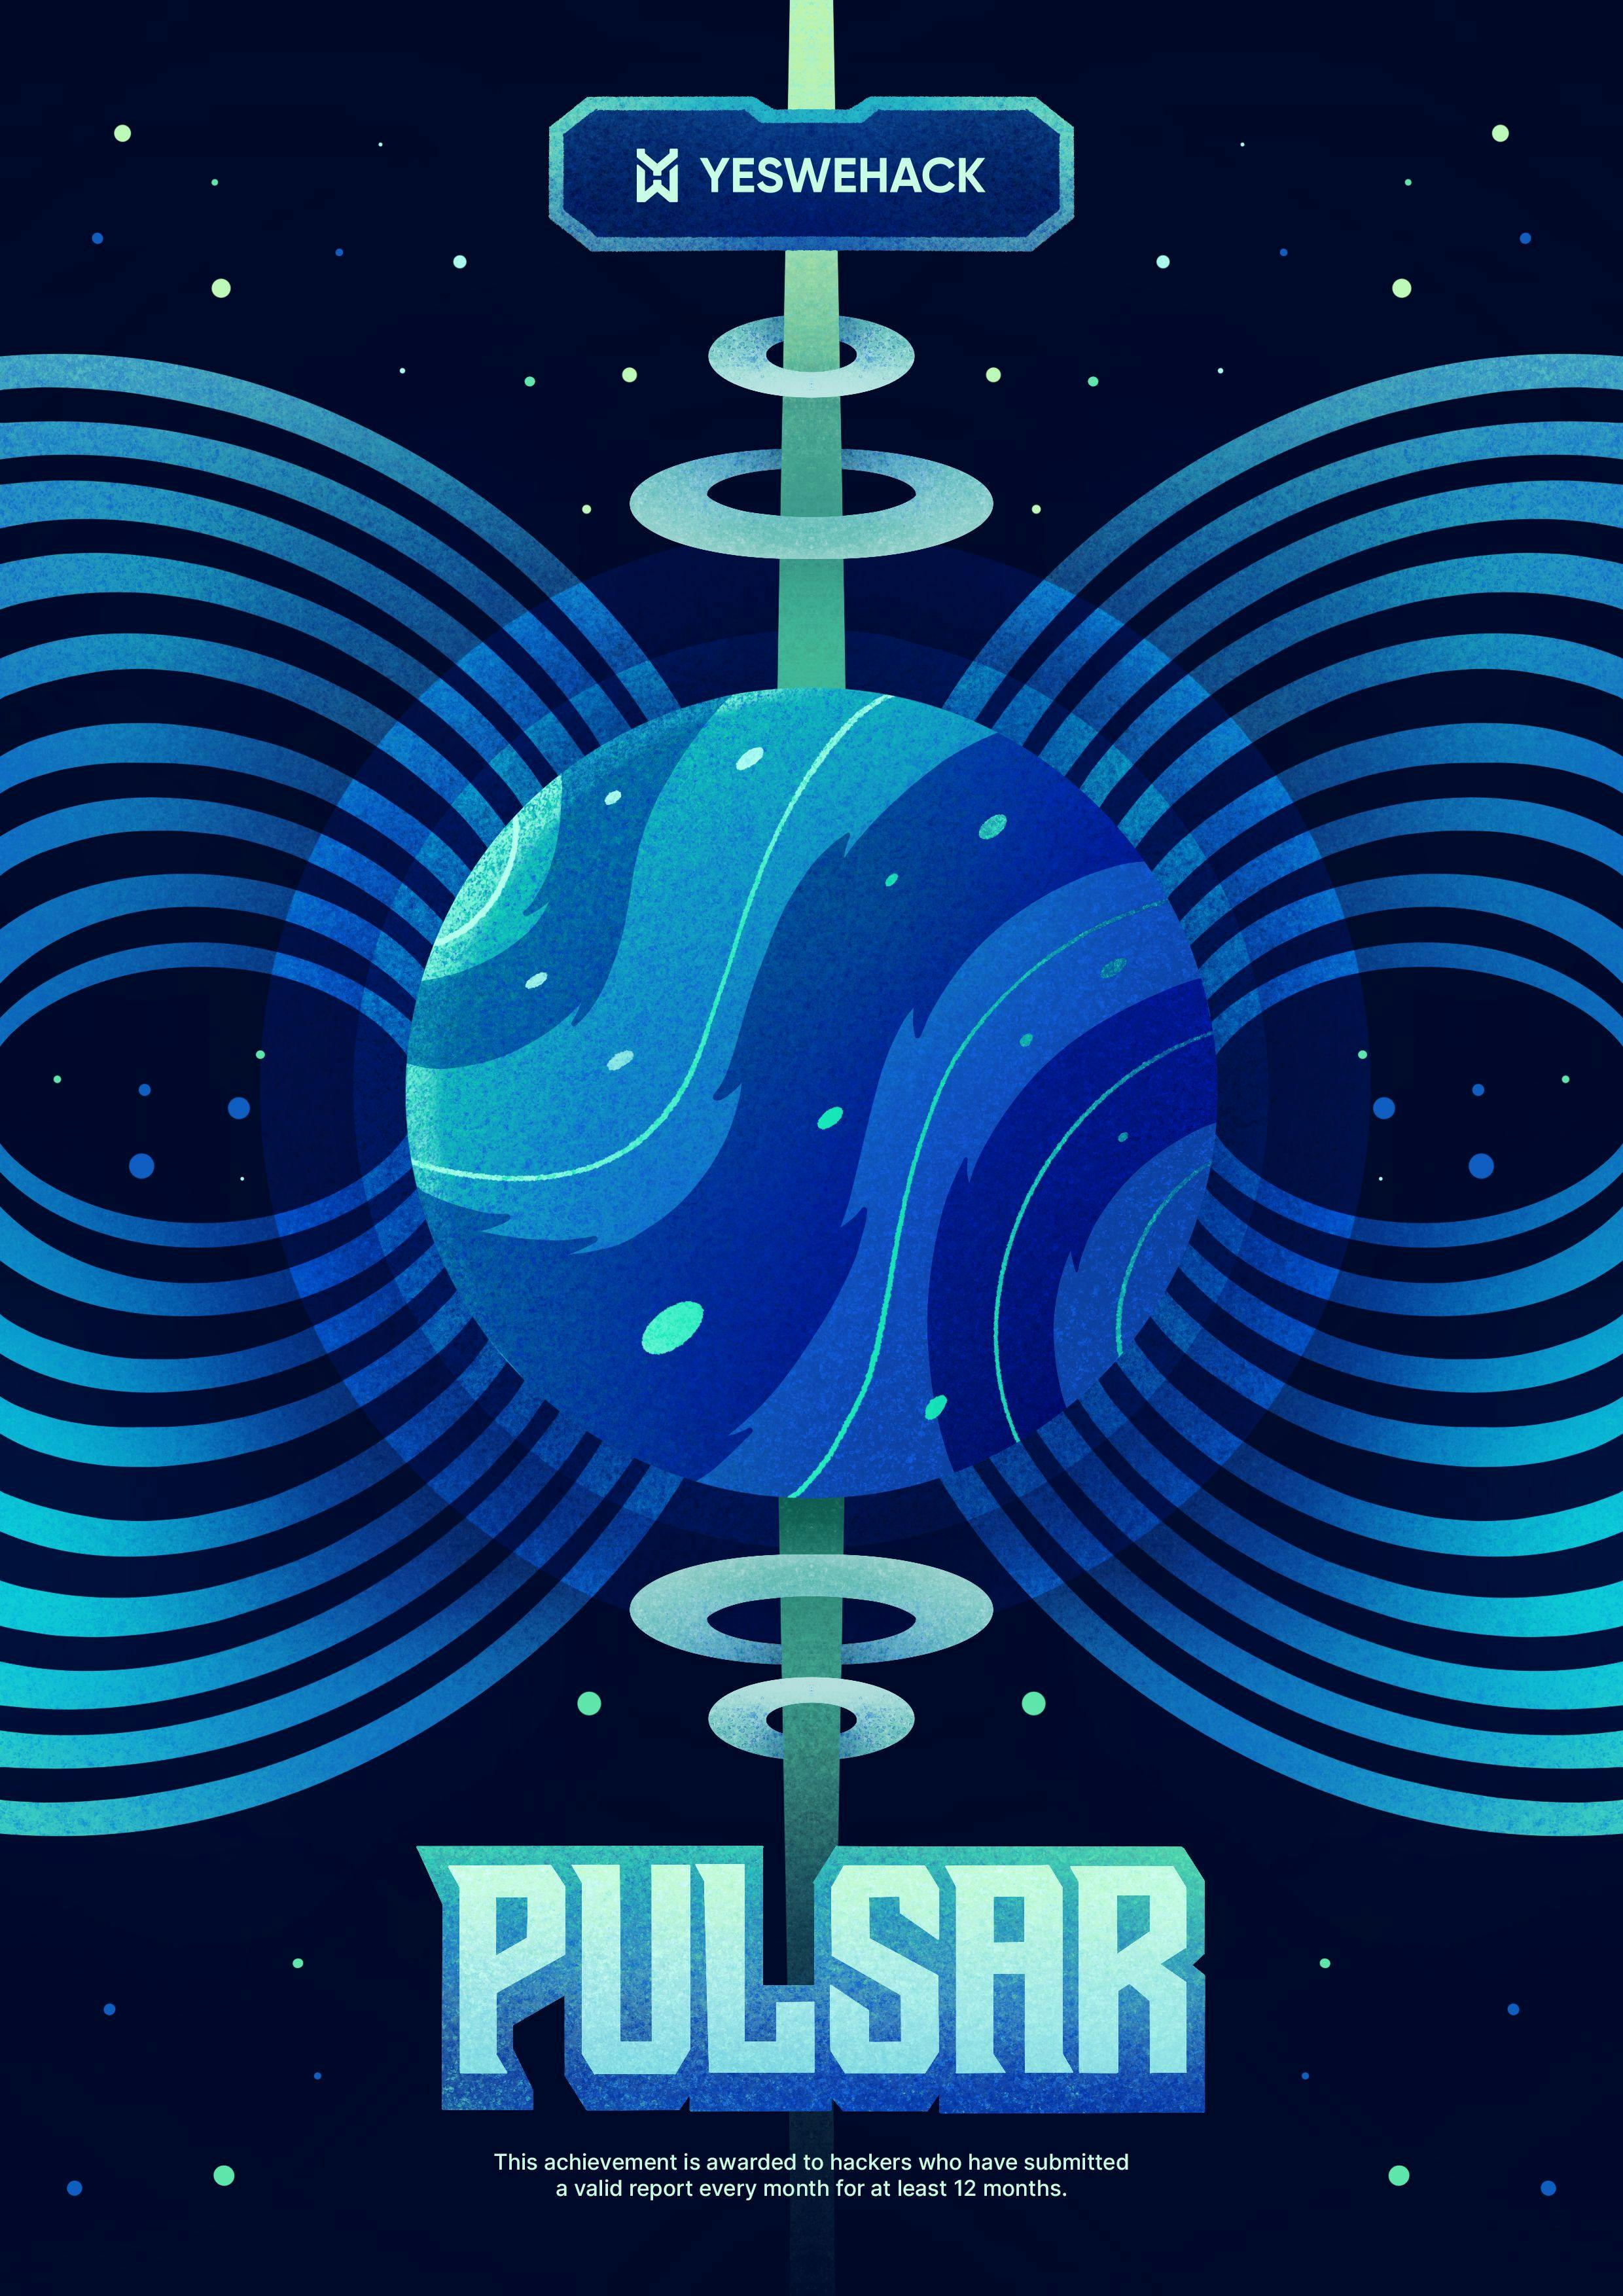 YesWeHack hunter achievements: PULSAR poster for ethical hackers who submitted valid reports every month for a full year